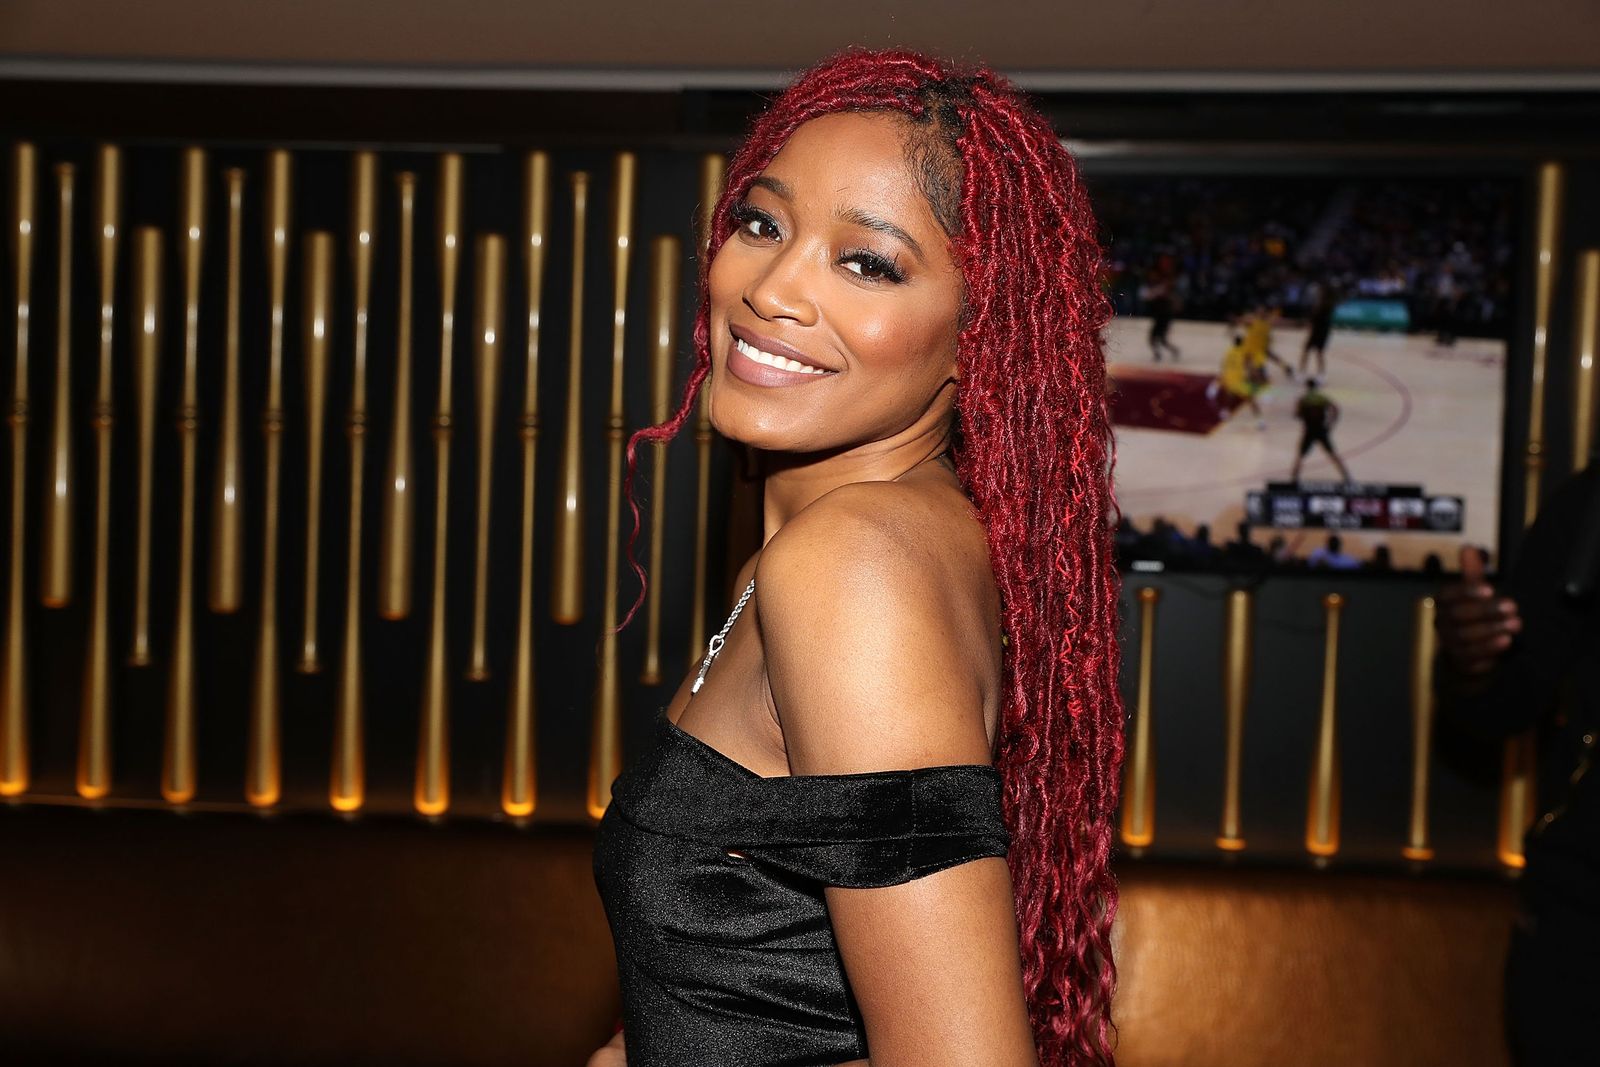 Keke Palmer at her album launch party in 2018 | Source: Getty Images